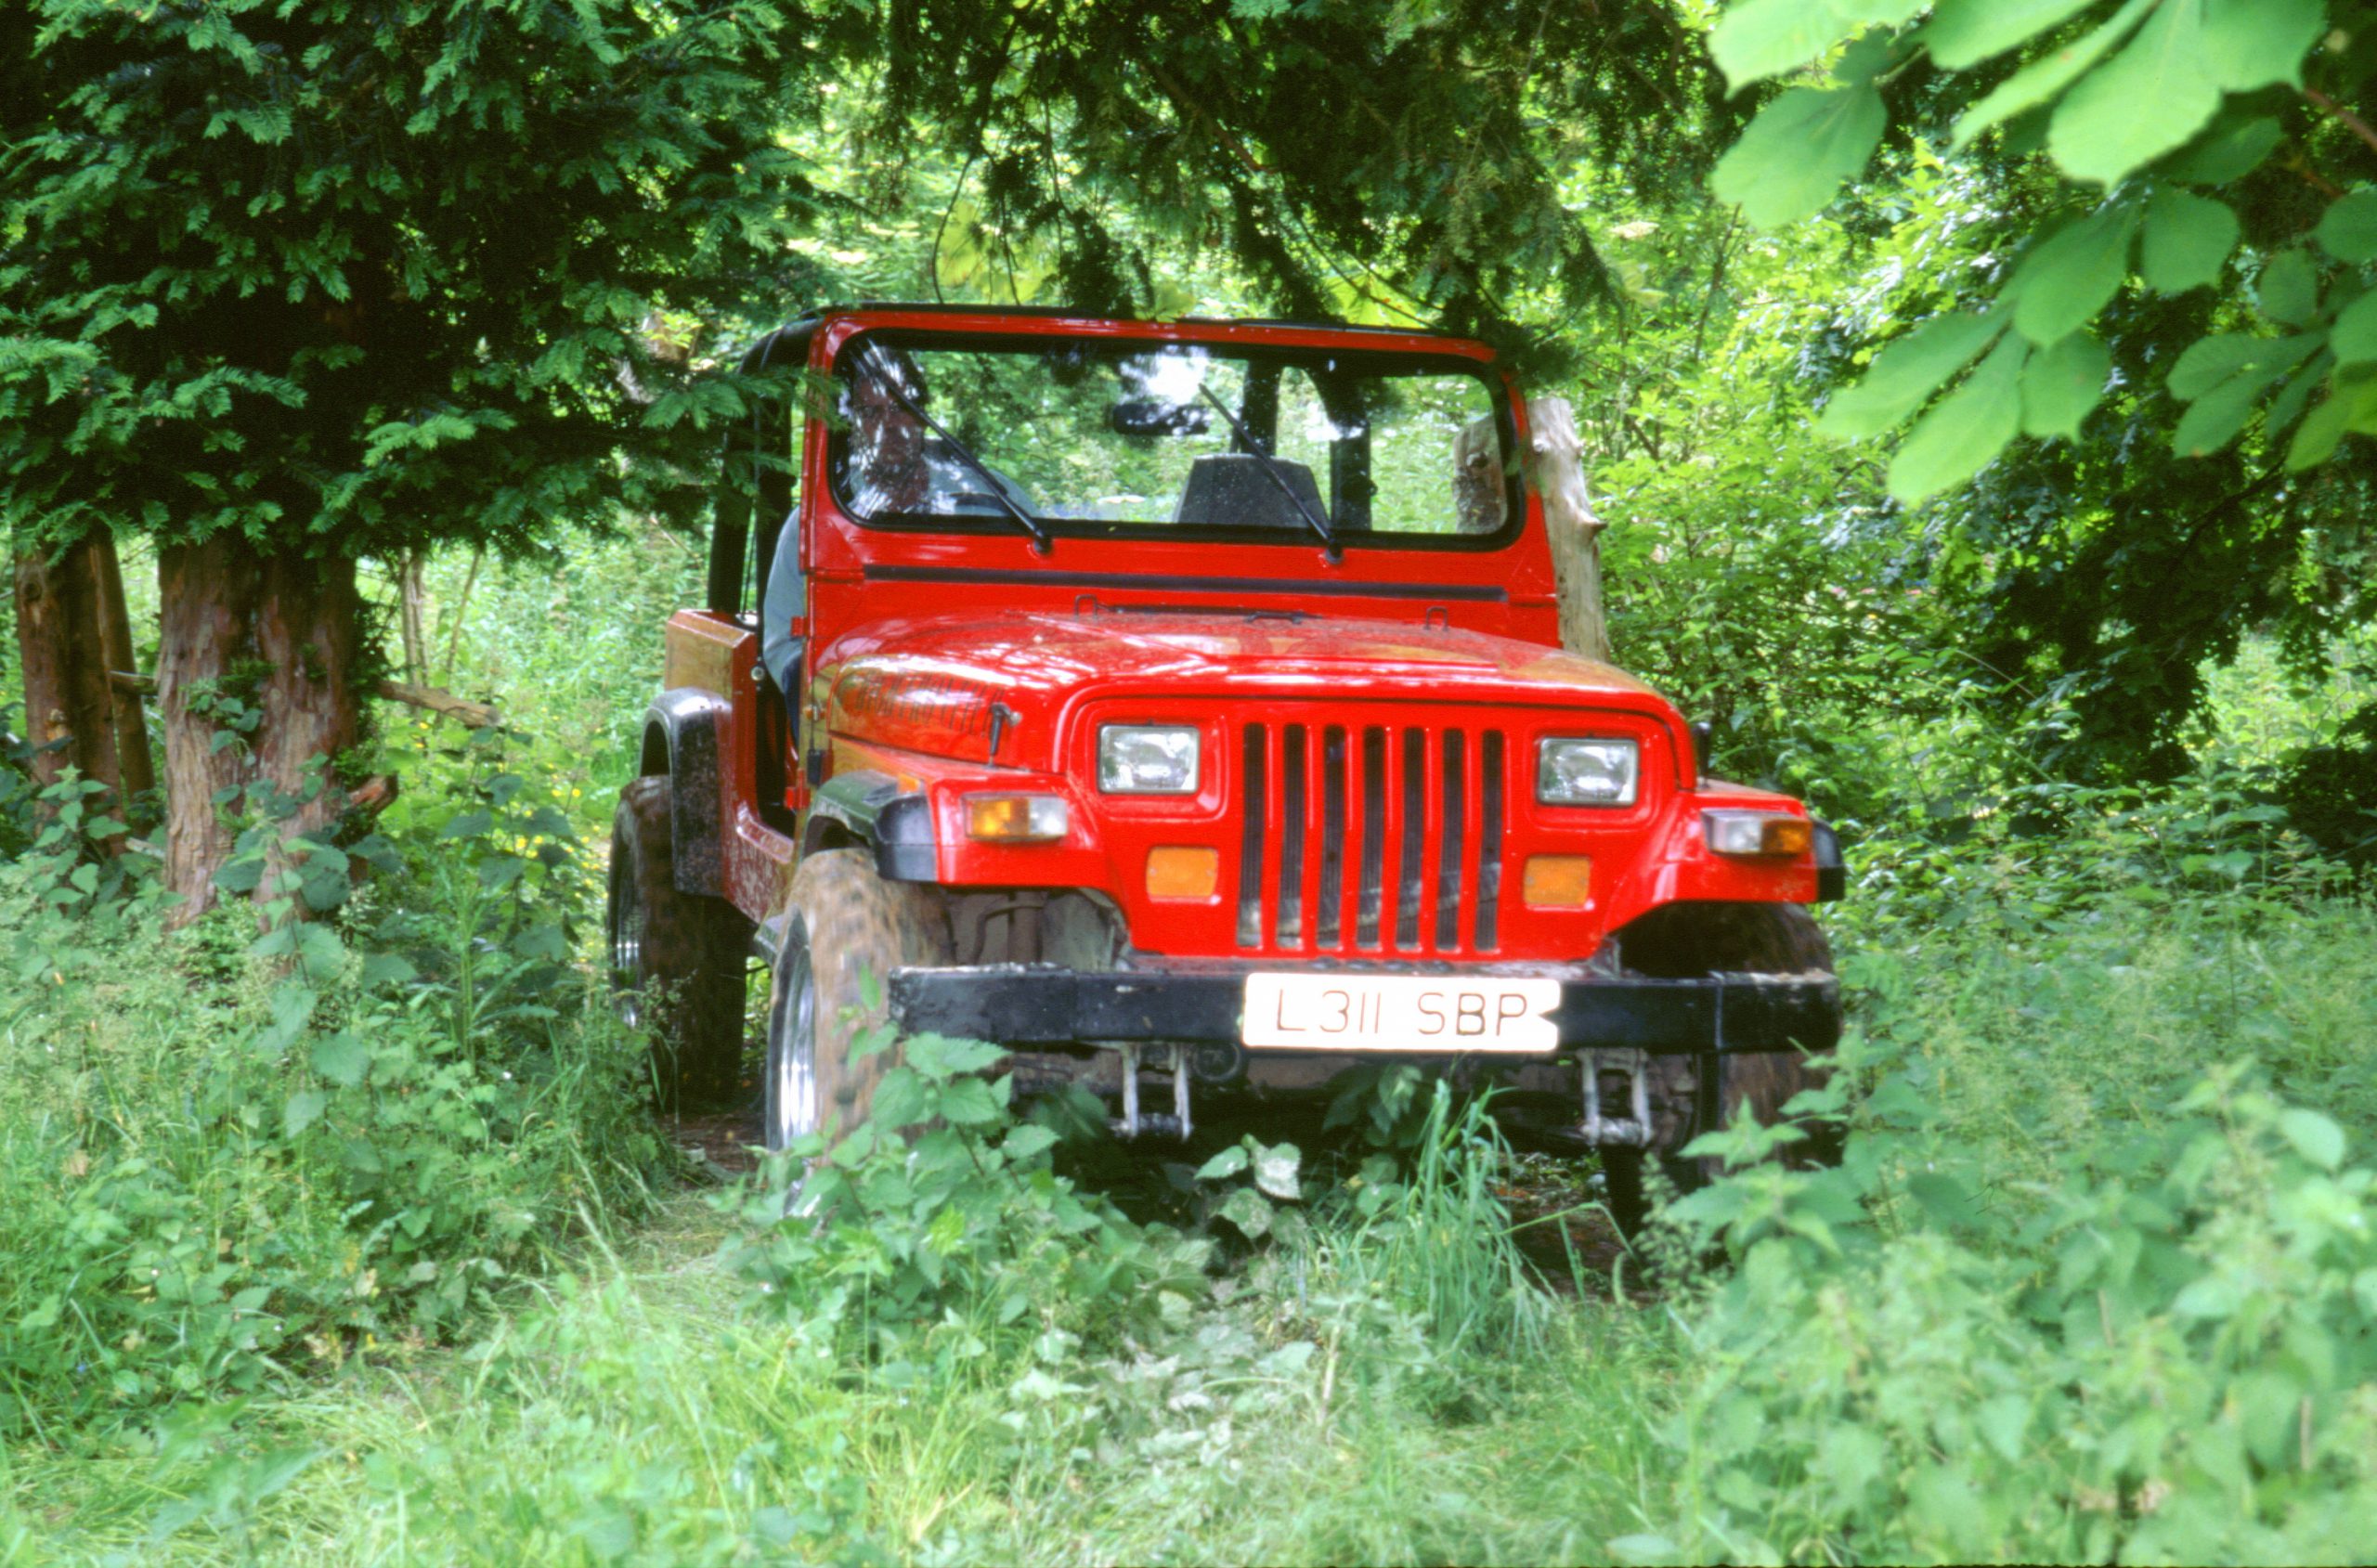 A red Jeep Wrangler SUV parked in trees